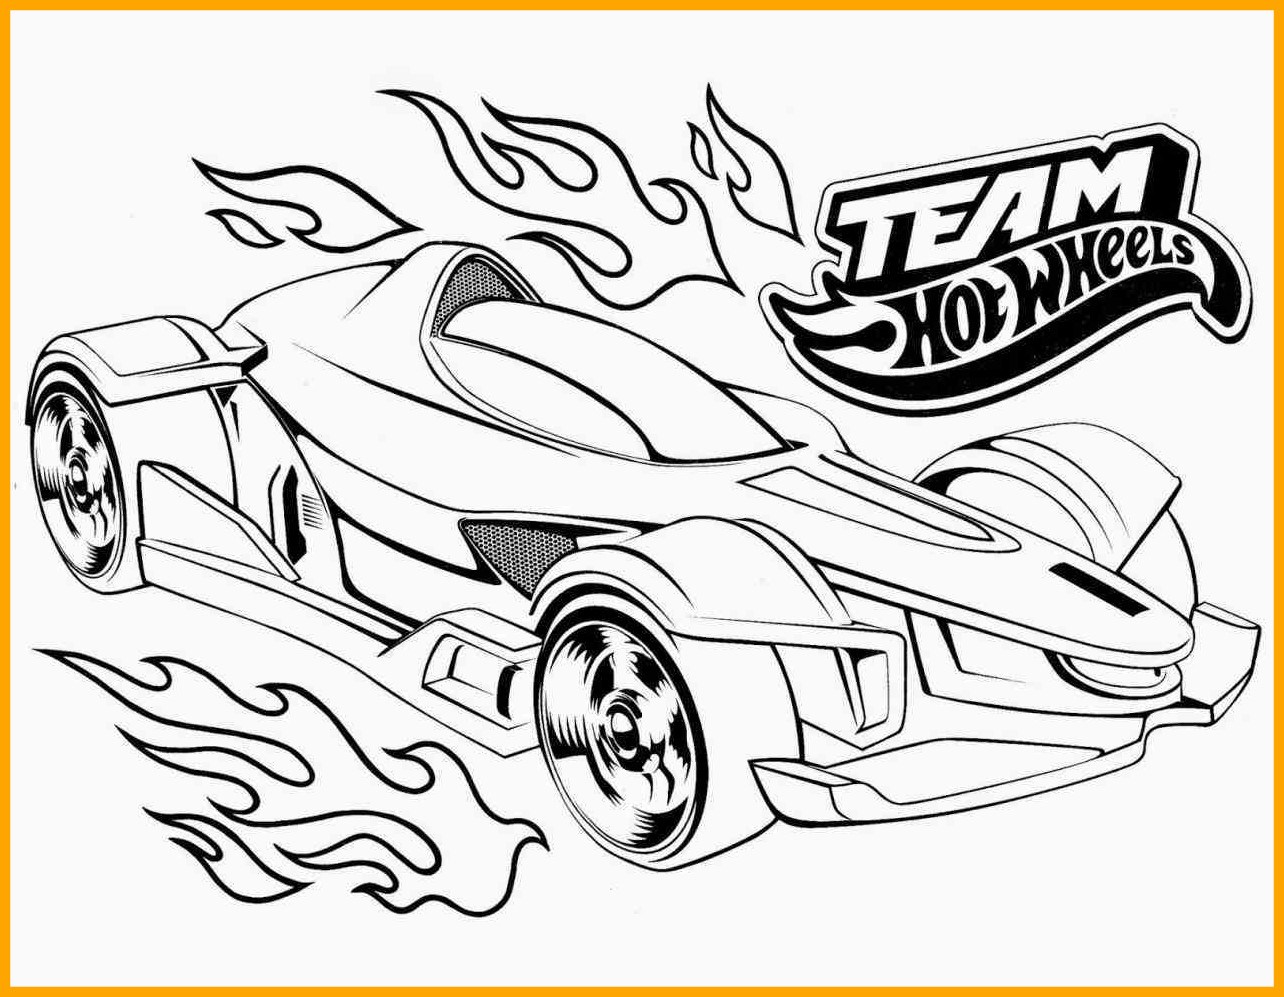 Download Race Car Coloring Pages To Print at GetDrawings.com | Free ...